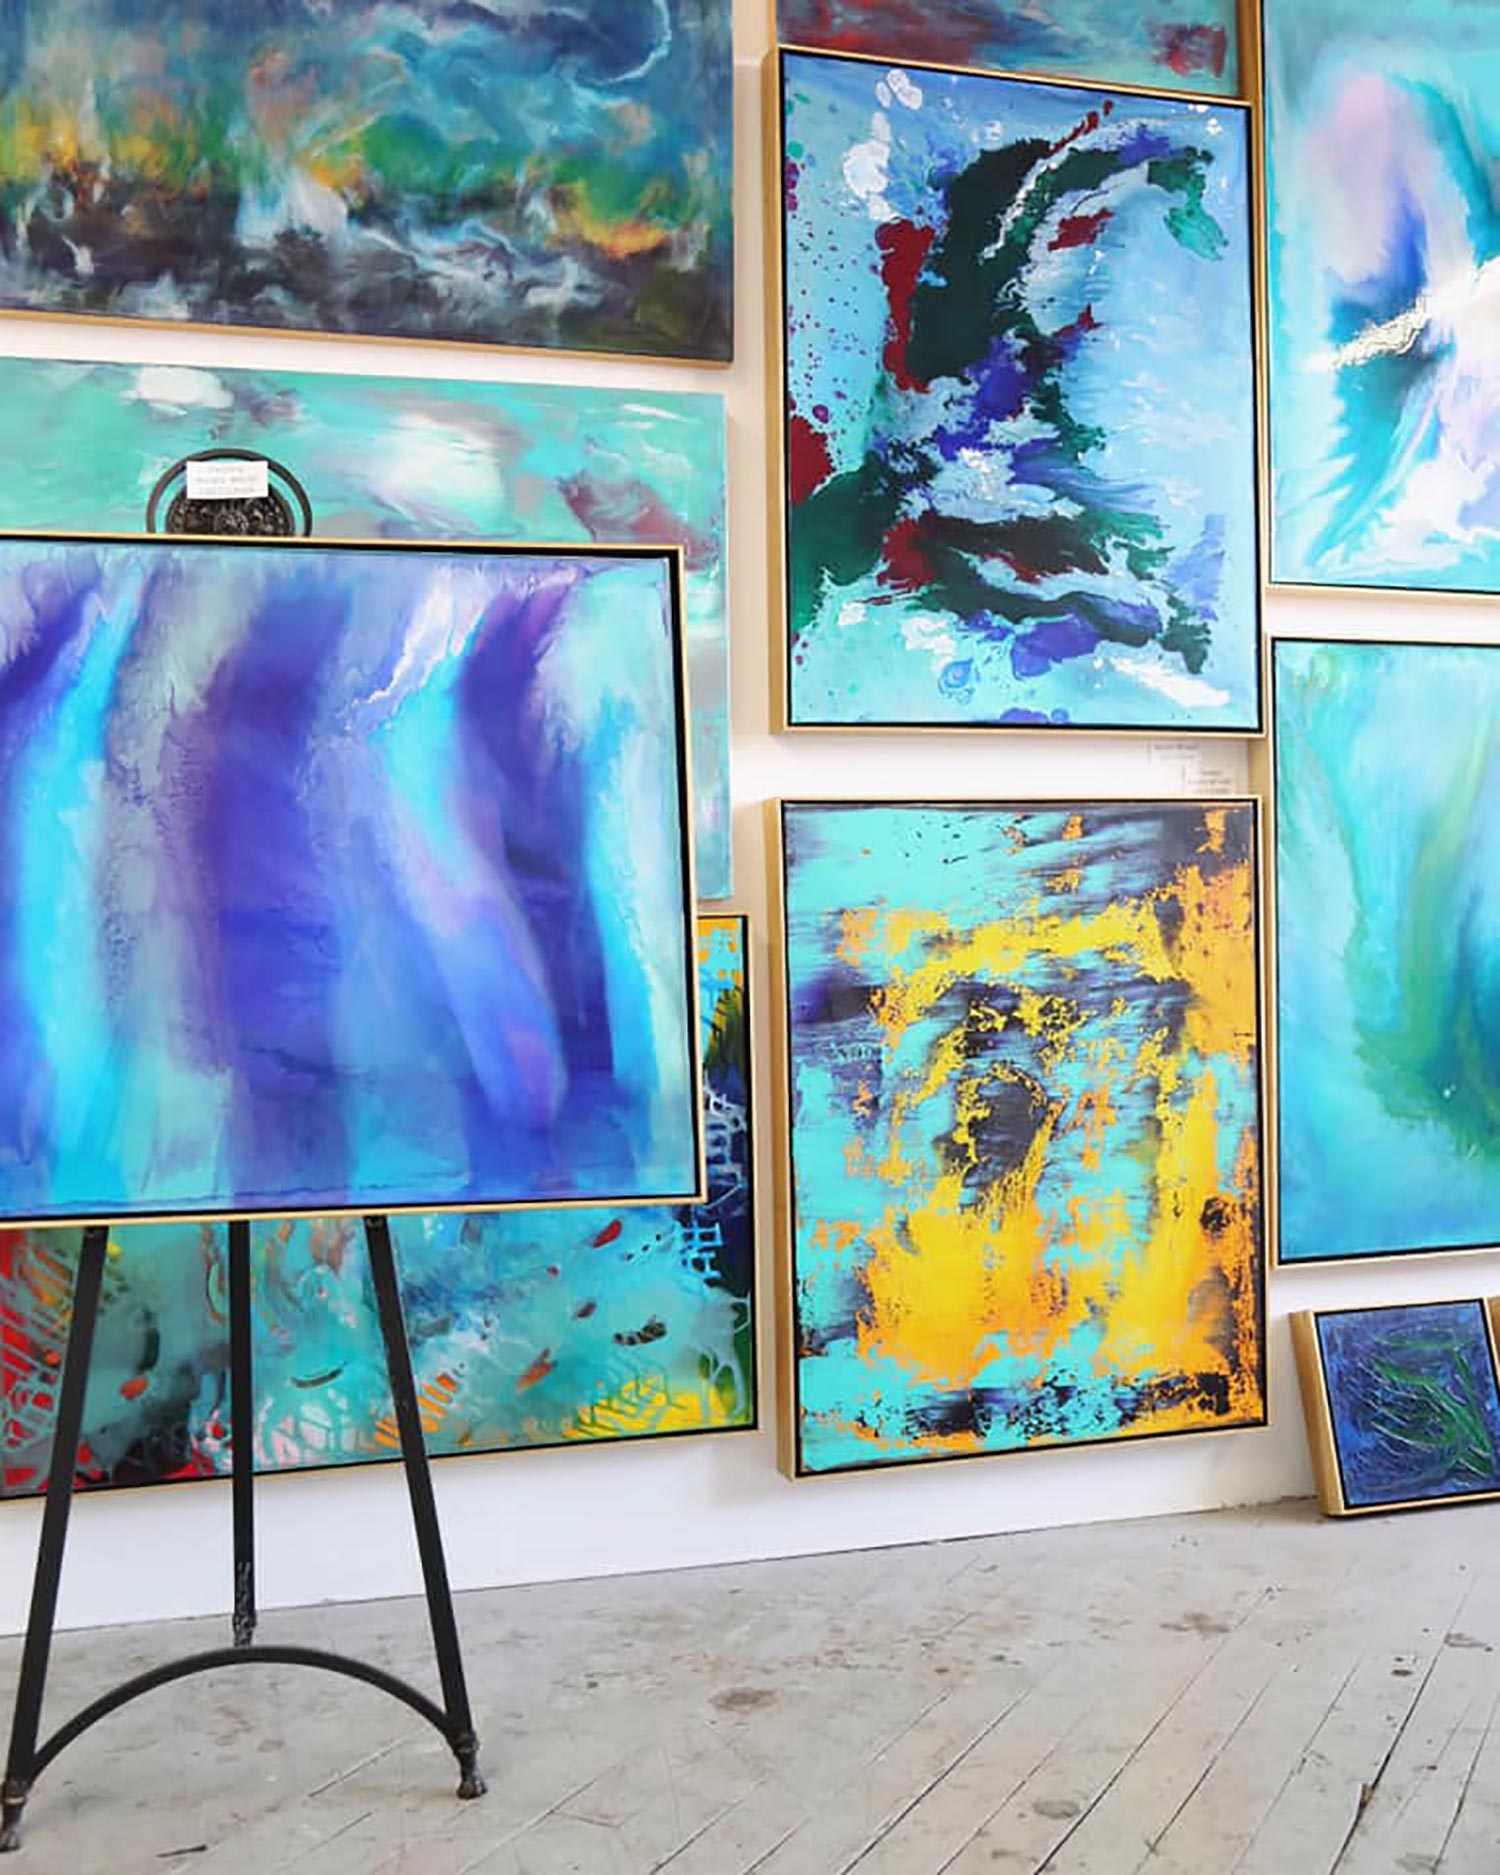 Photo of a wall of canvases painted in organic strokes of blue, teal, and gold, with an easel in the front left.